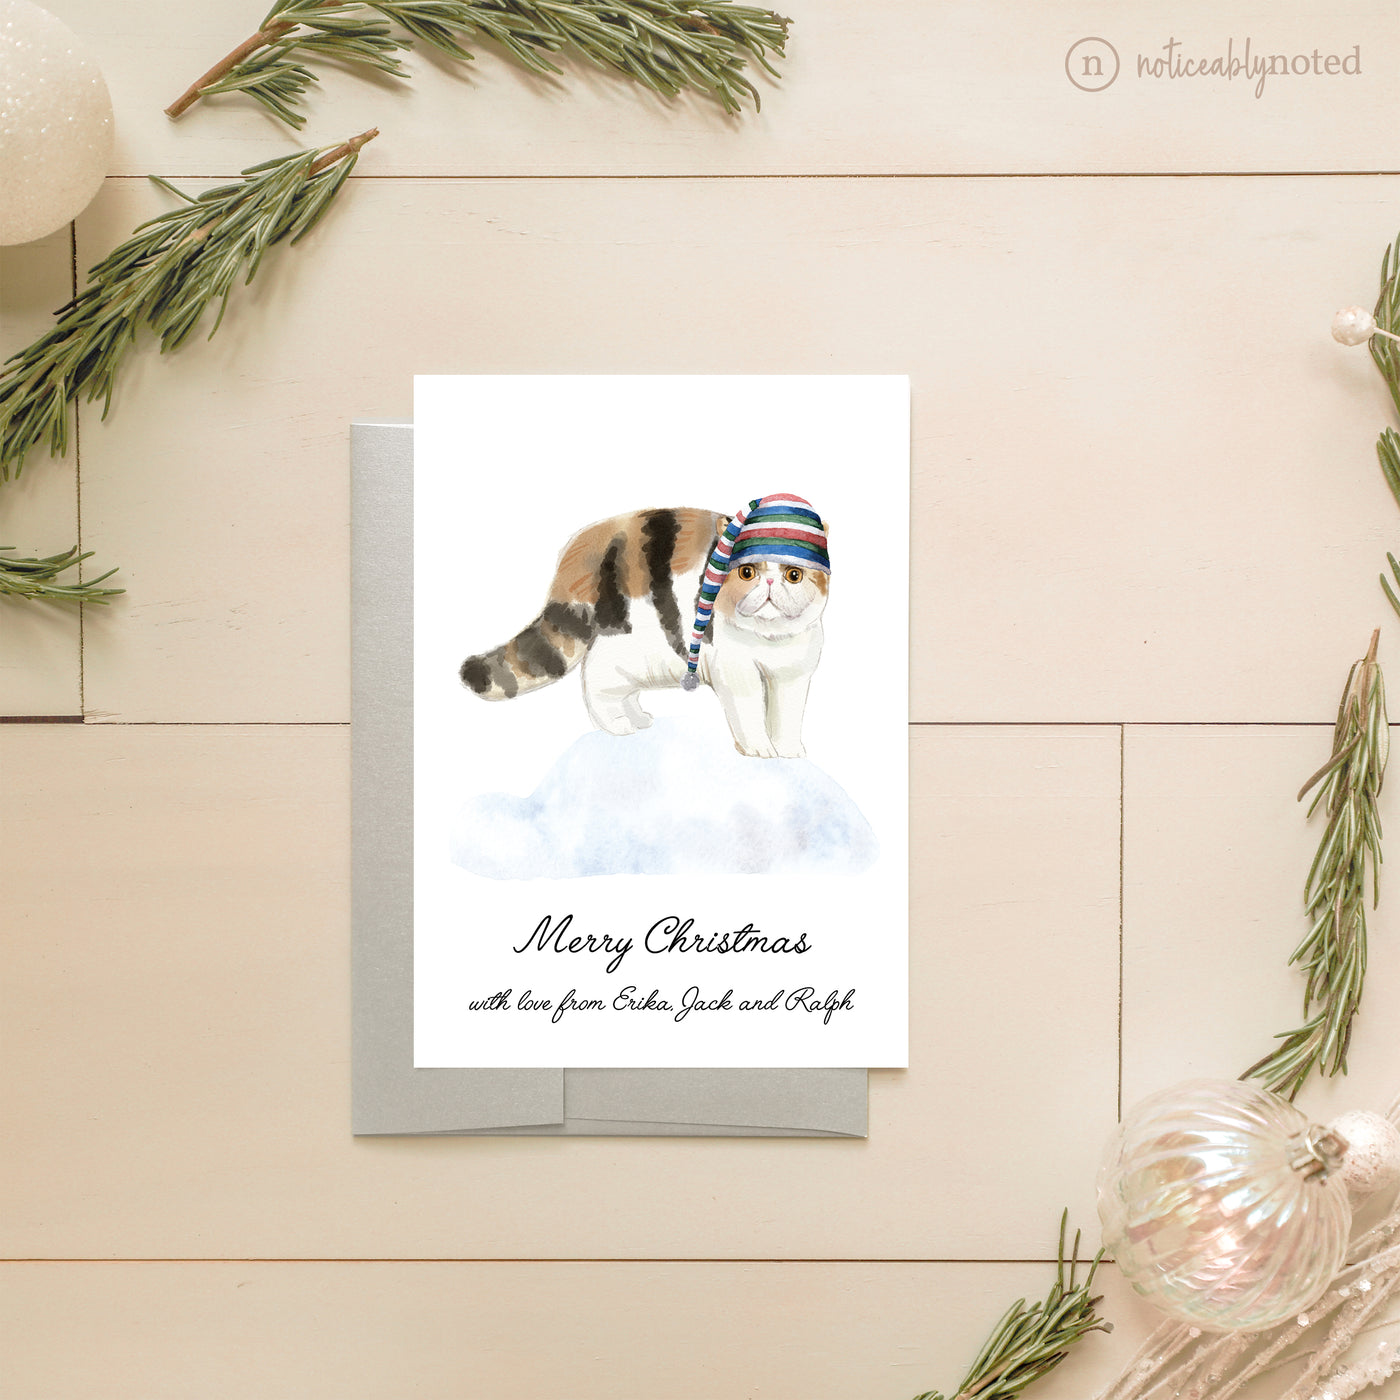 Exotic Shorthair Holiday Greeting Cards | Noticeably Noted